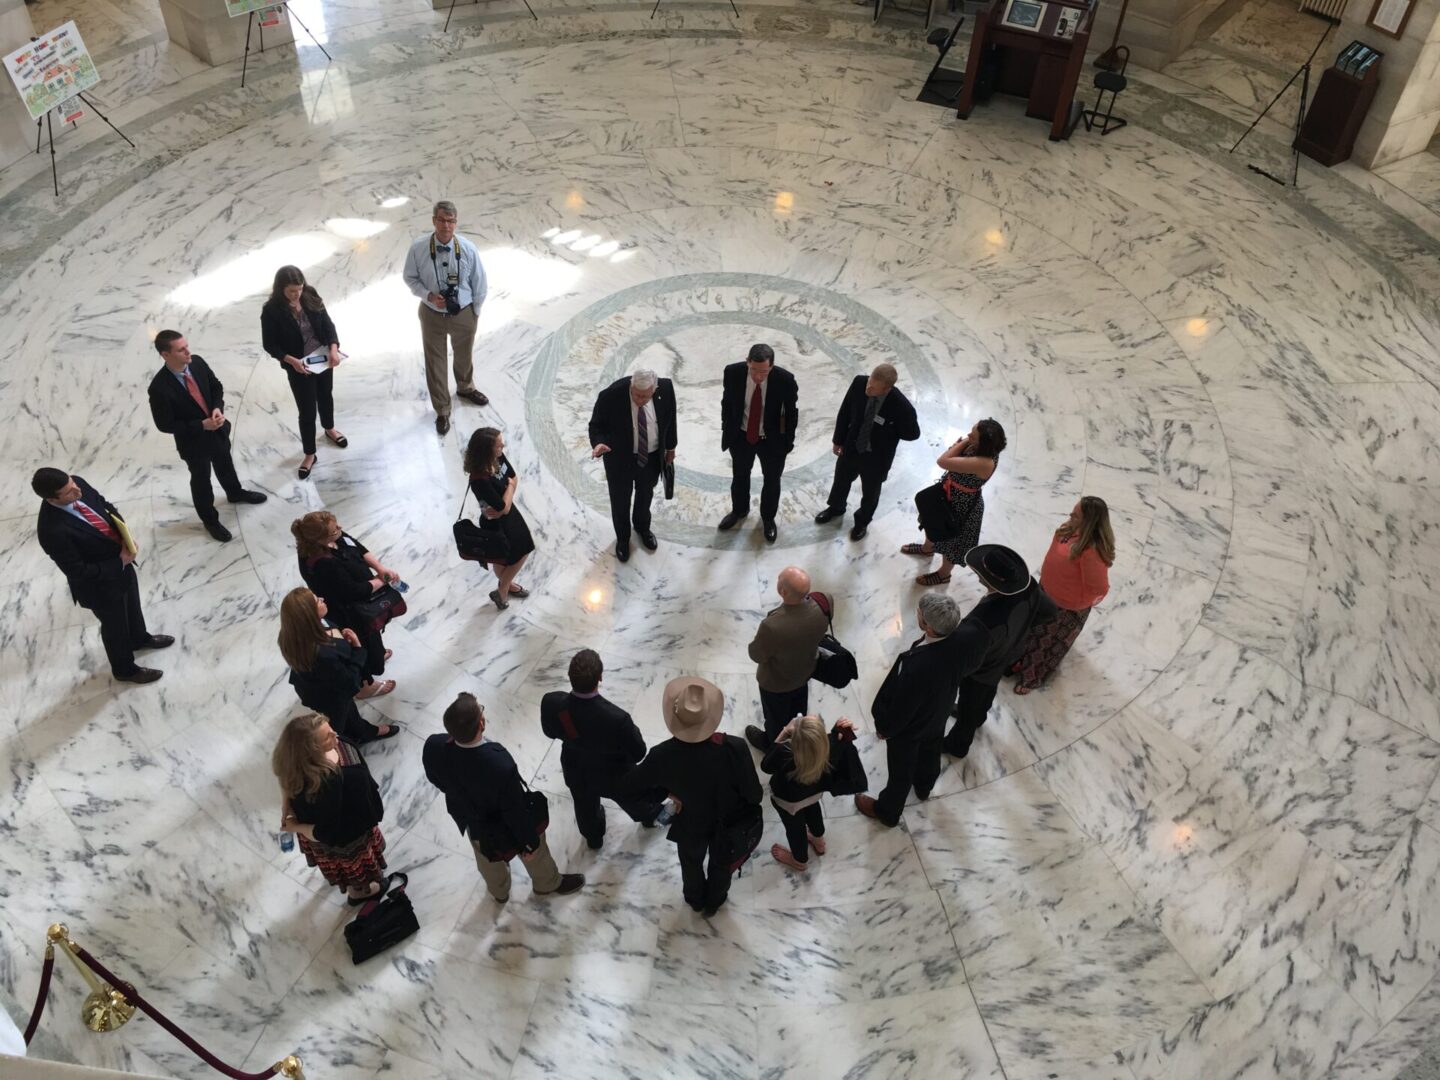 A group of people standing in the center of a circle.